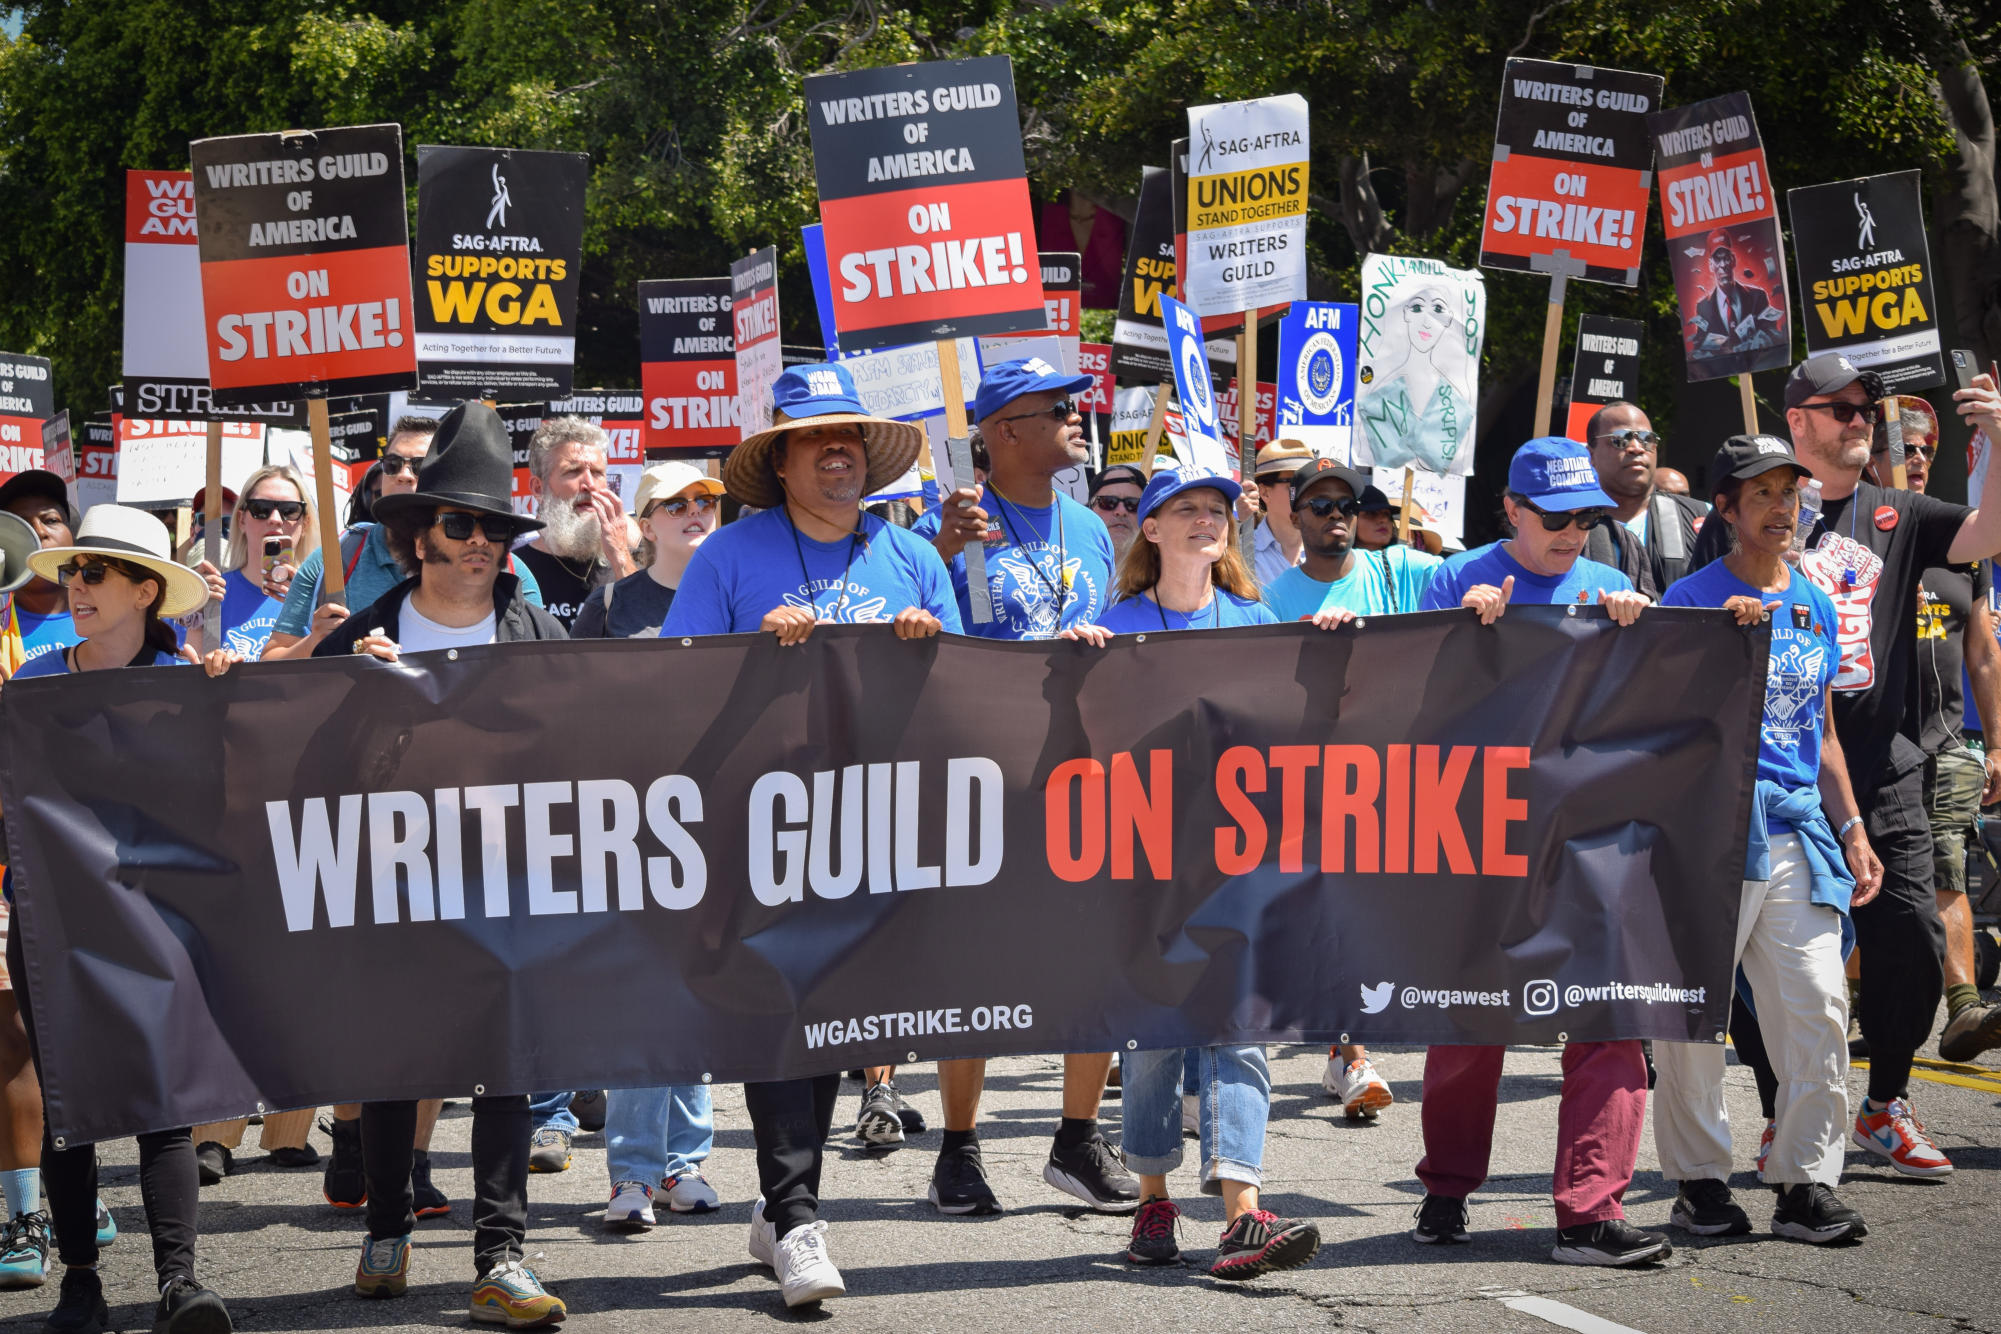 Writers take the streets to protest. These protests are causing disruption in Hollywood.